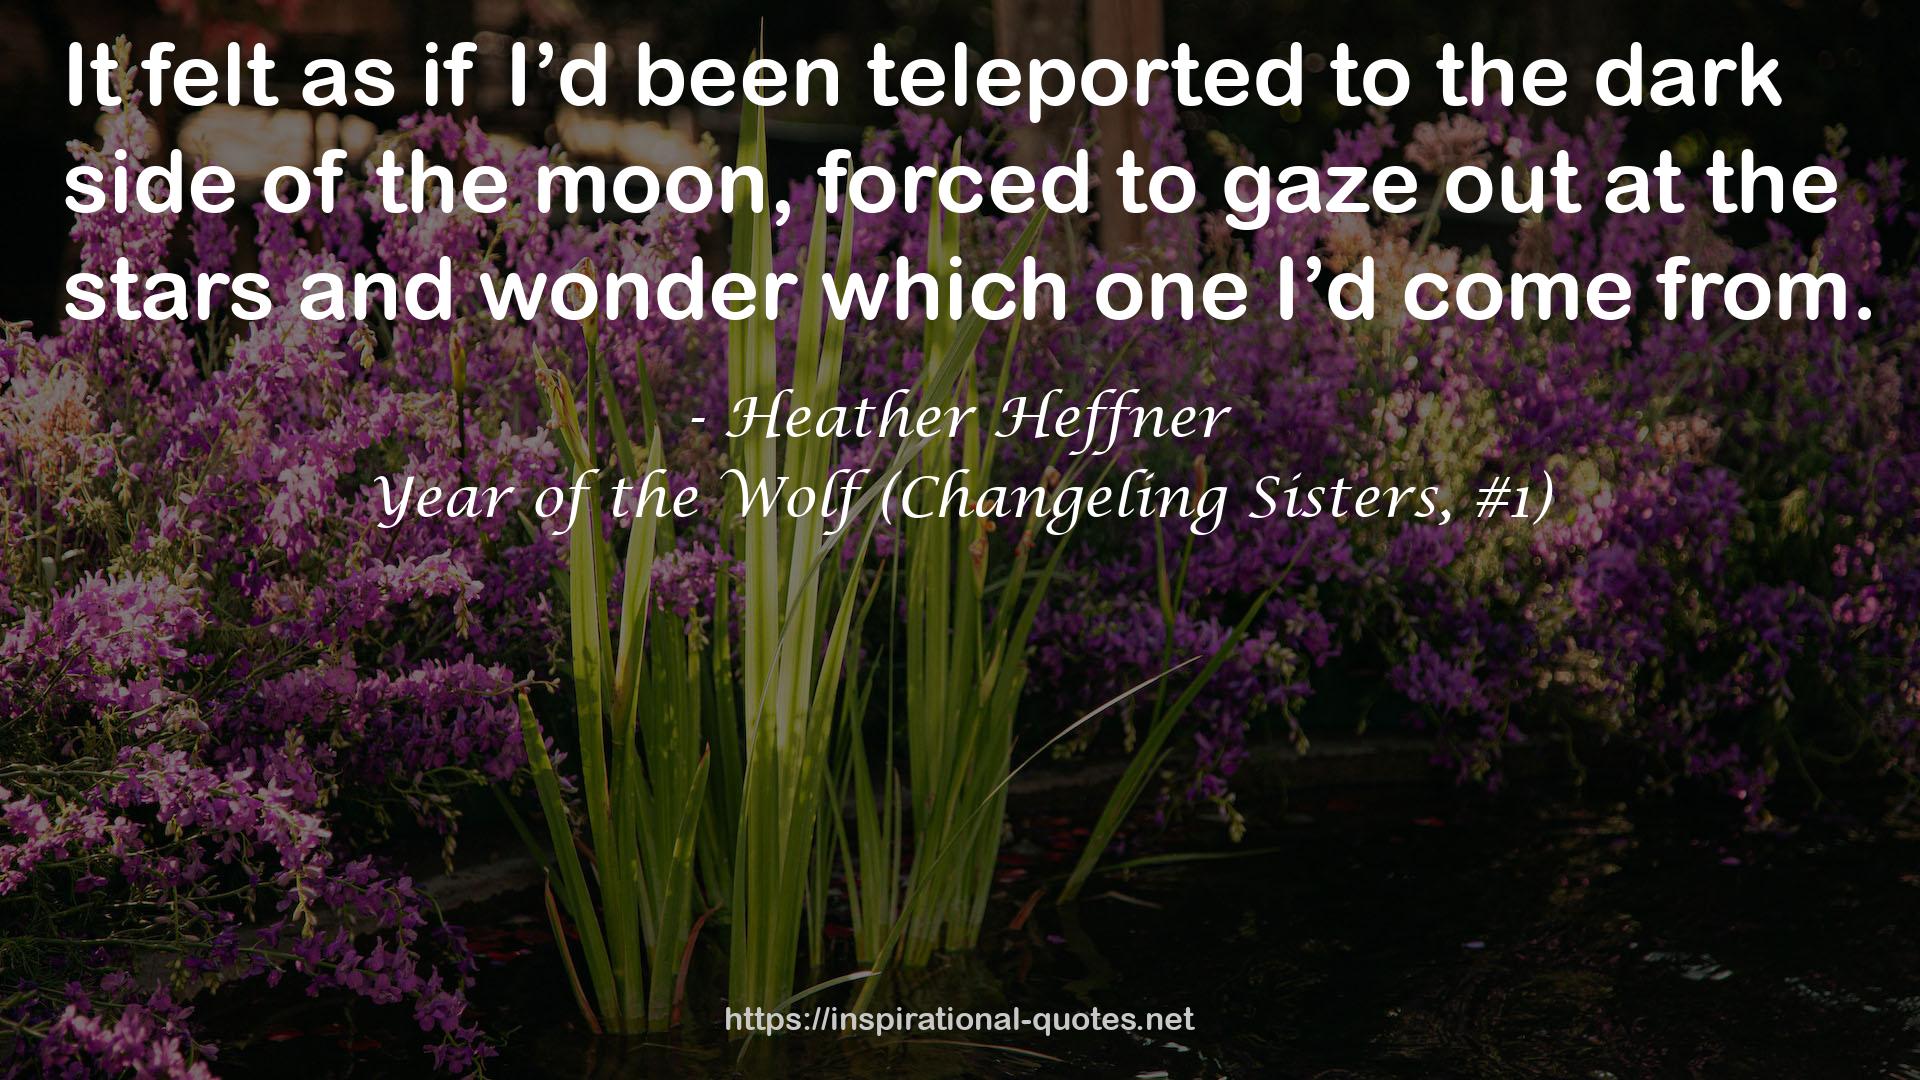 Year of the Wolf (Changeling Sisters, #1) QUOTES